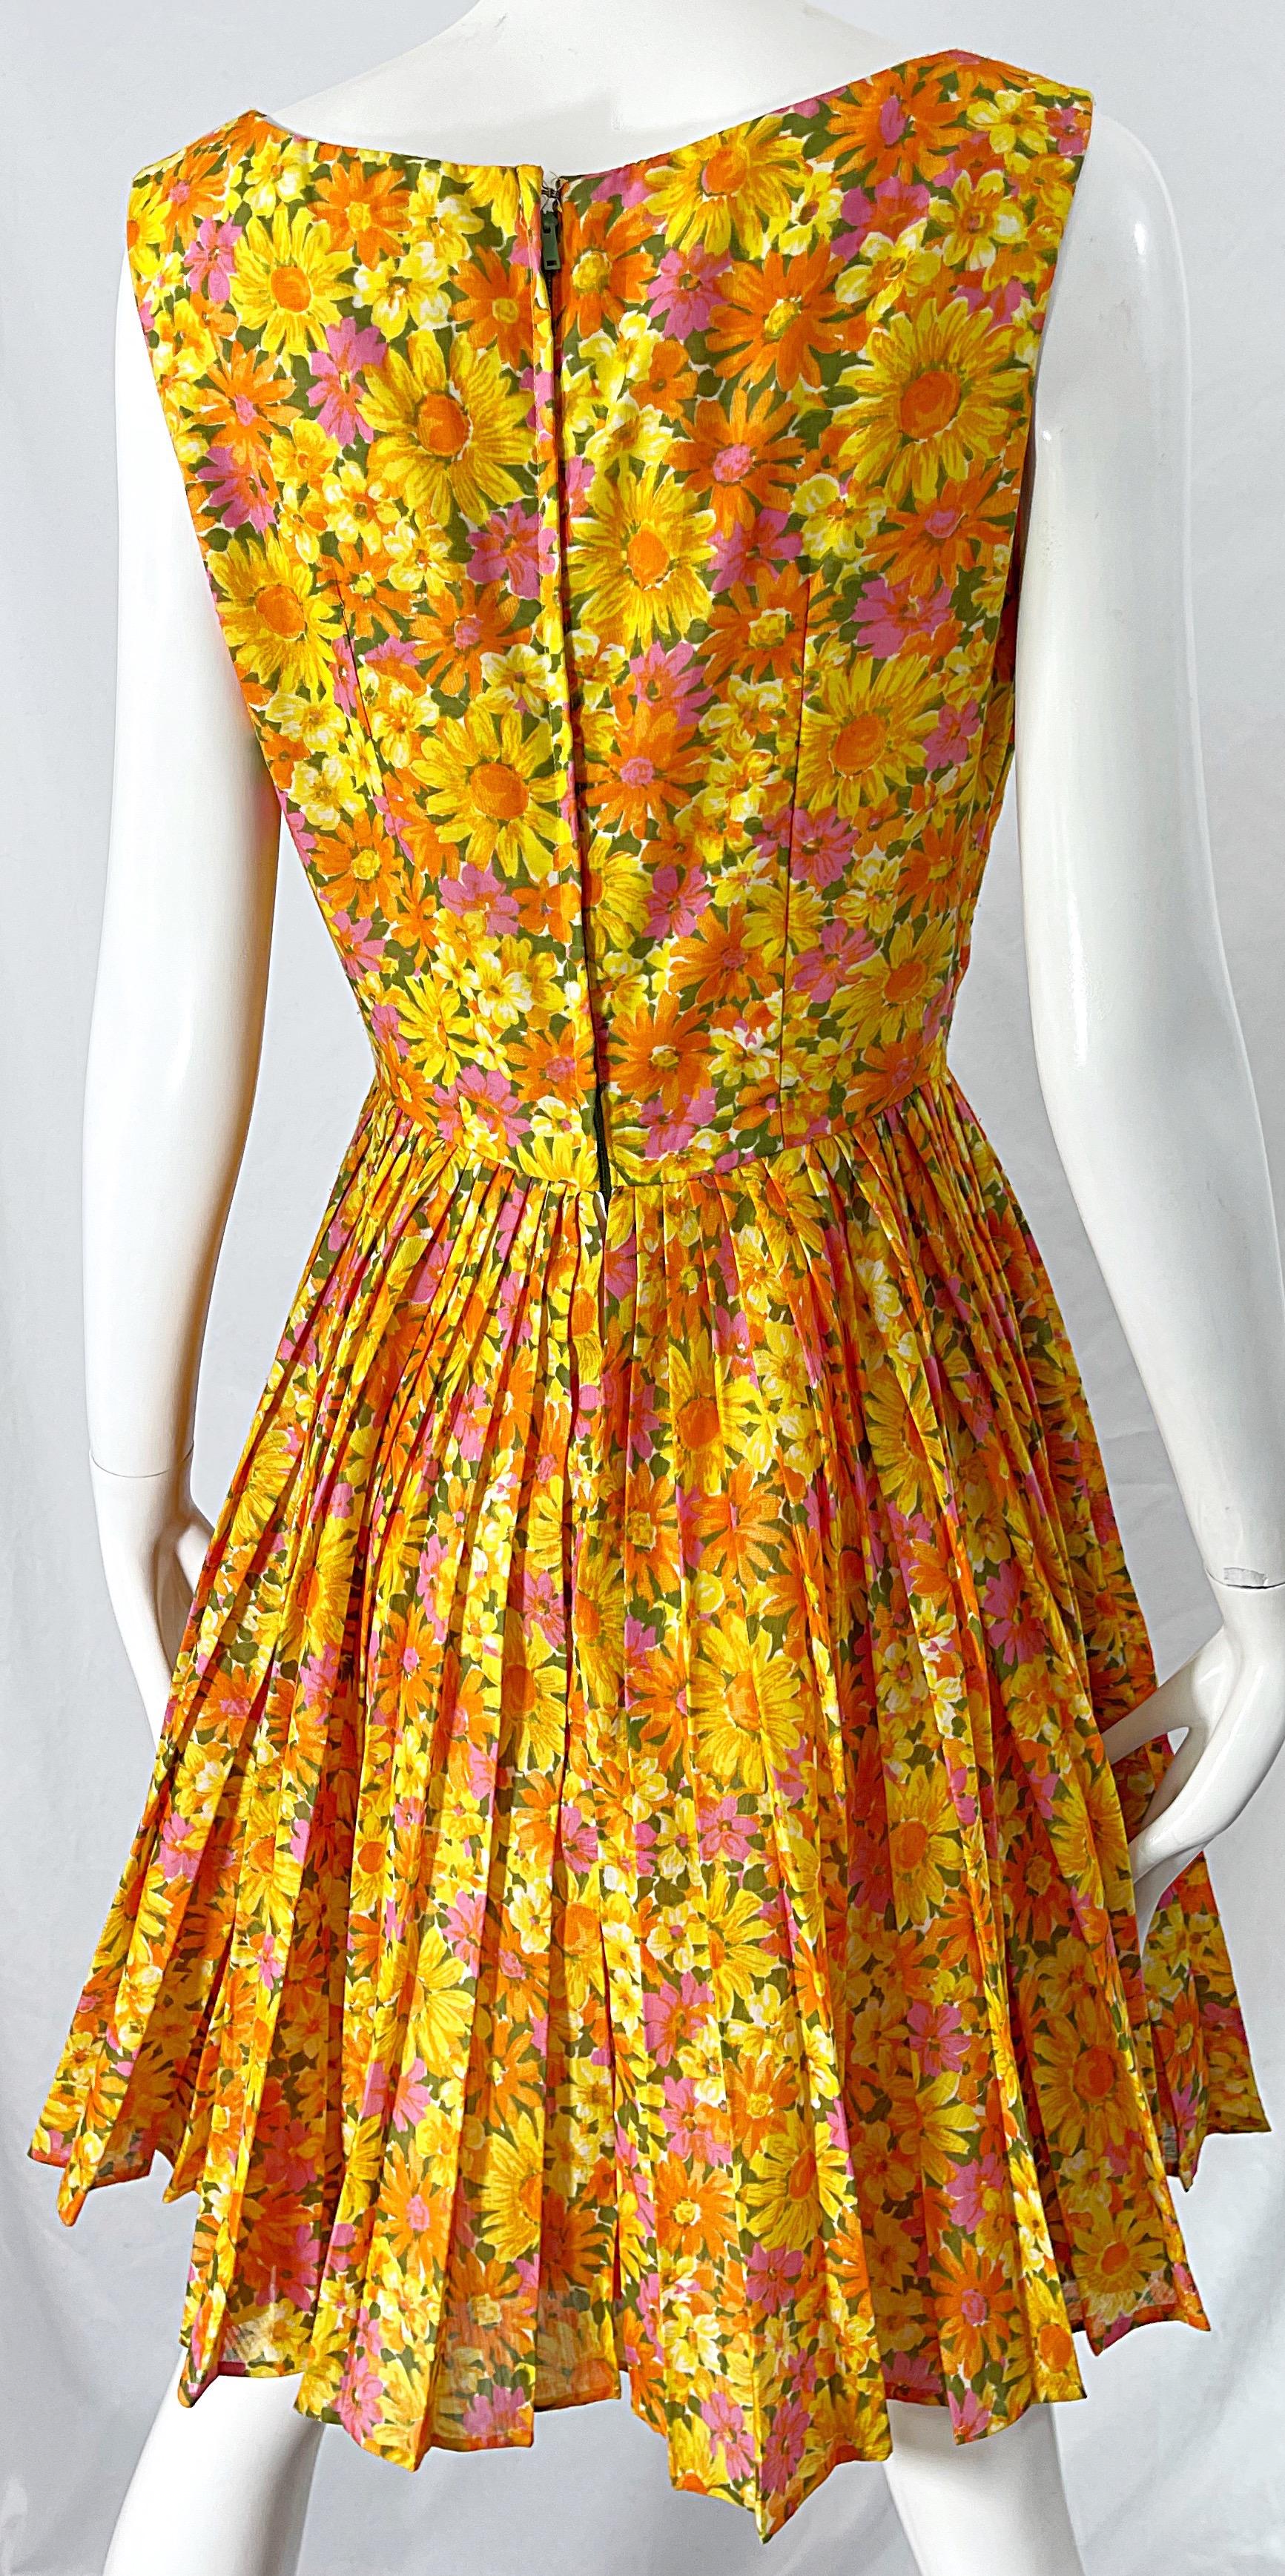 1950s Suzy Perette Yellow Pink Orange Daisy Print Cotton Vintage 50s Dress In Excellent Condition For Sale In San Diego, CA